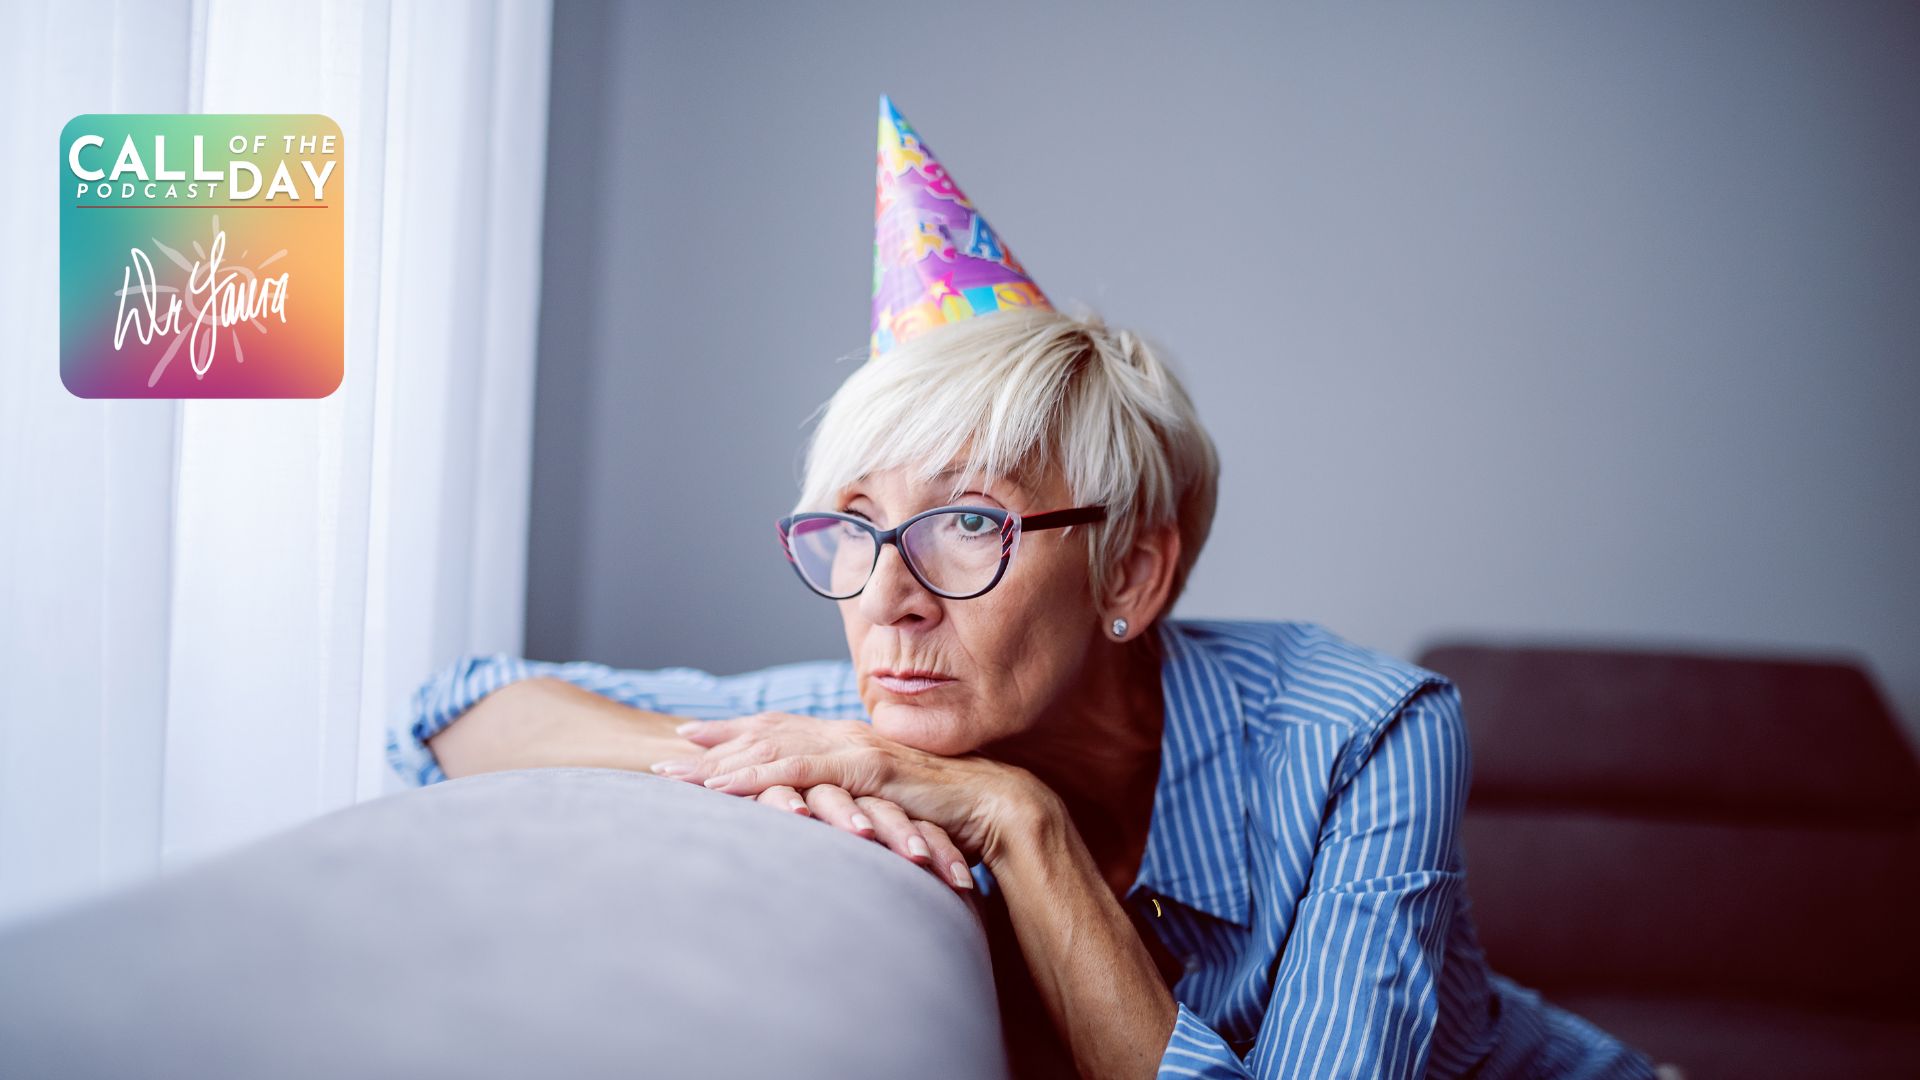 COTD Podcast: I Wasn't Invited to My Grandson's Birthday Party